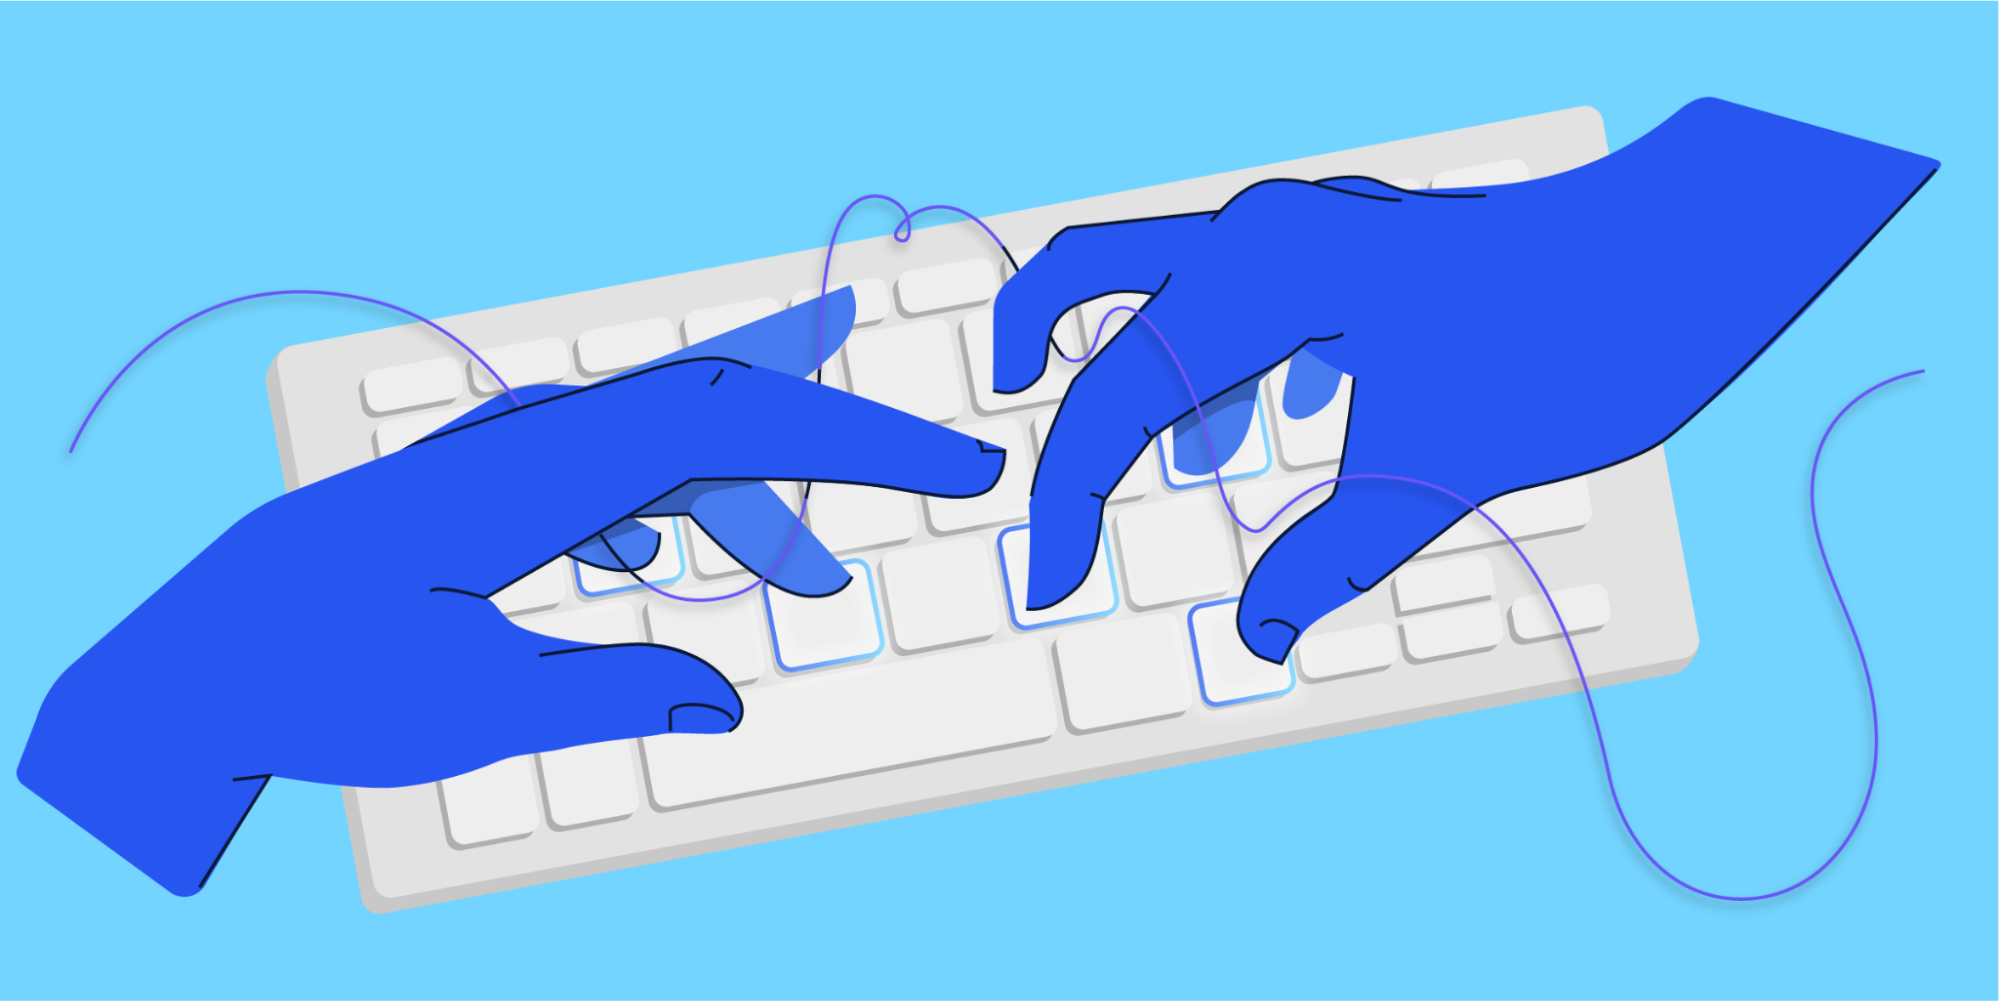 Abstract image of a user's hands typing multiple keys simultaneously.